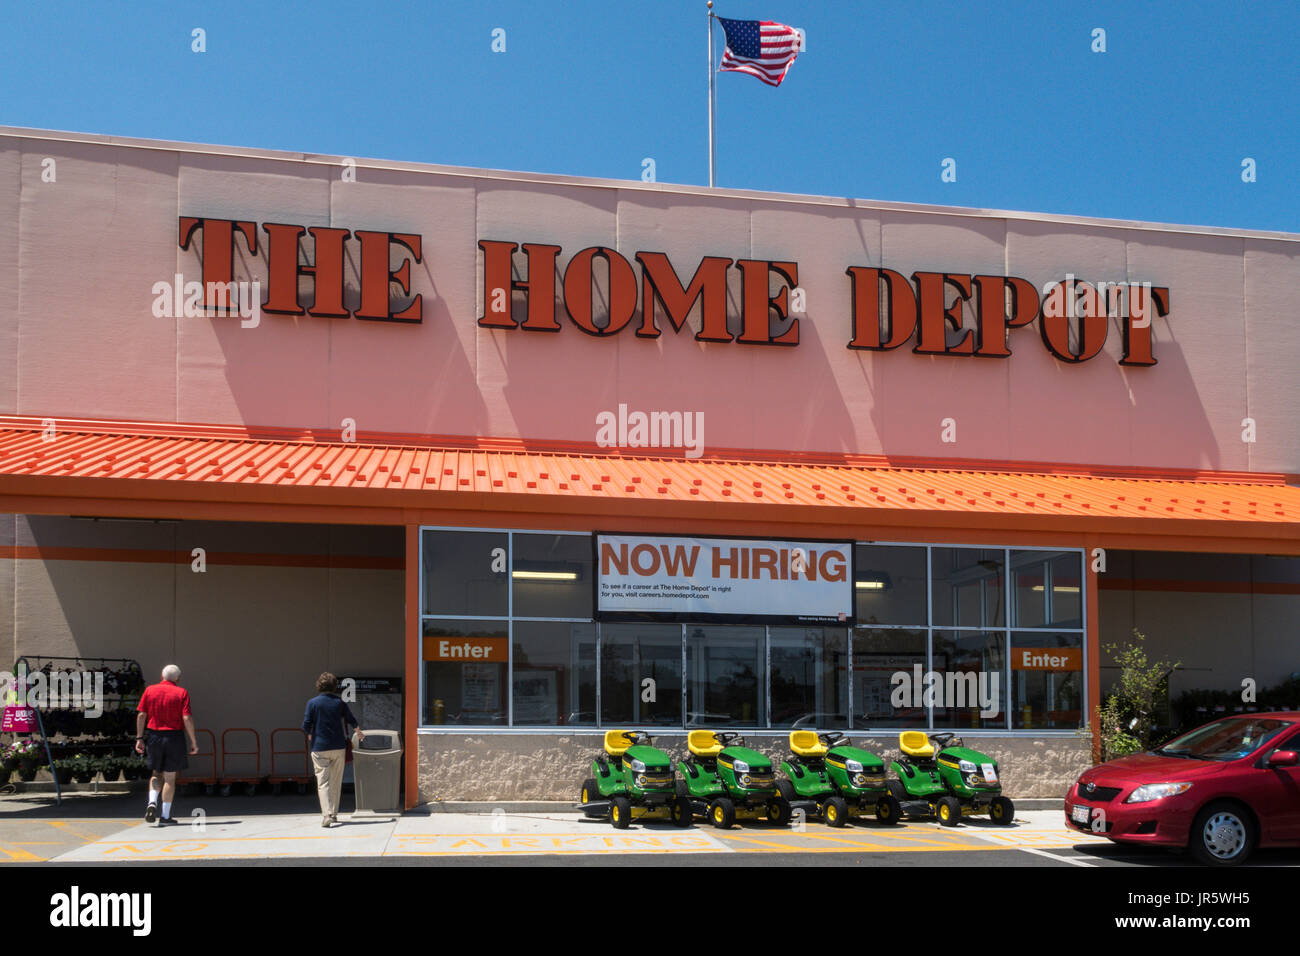 The Home Depot Storefront, NYC Stock Photo